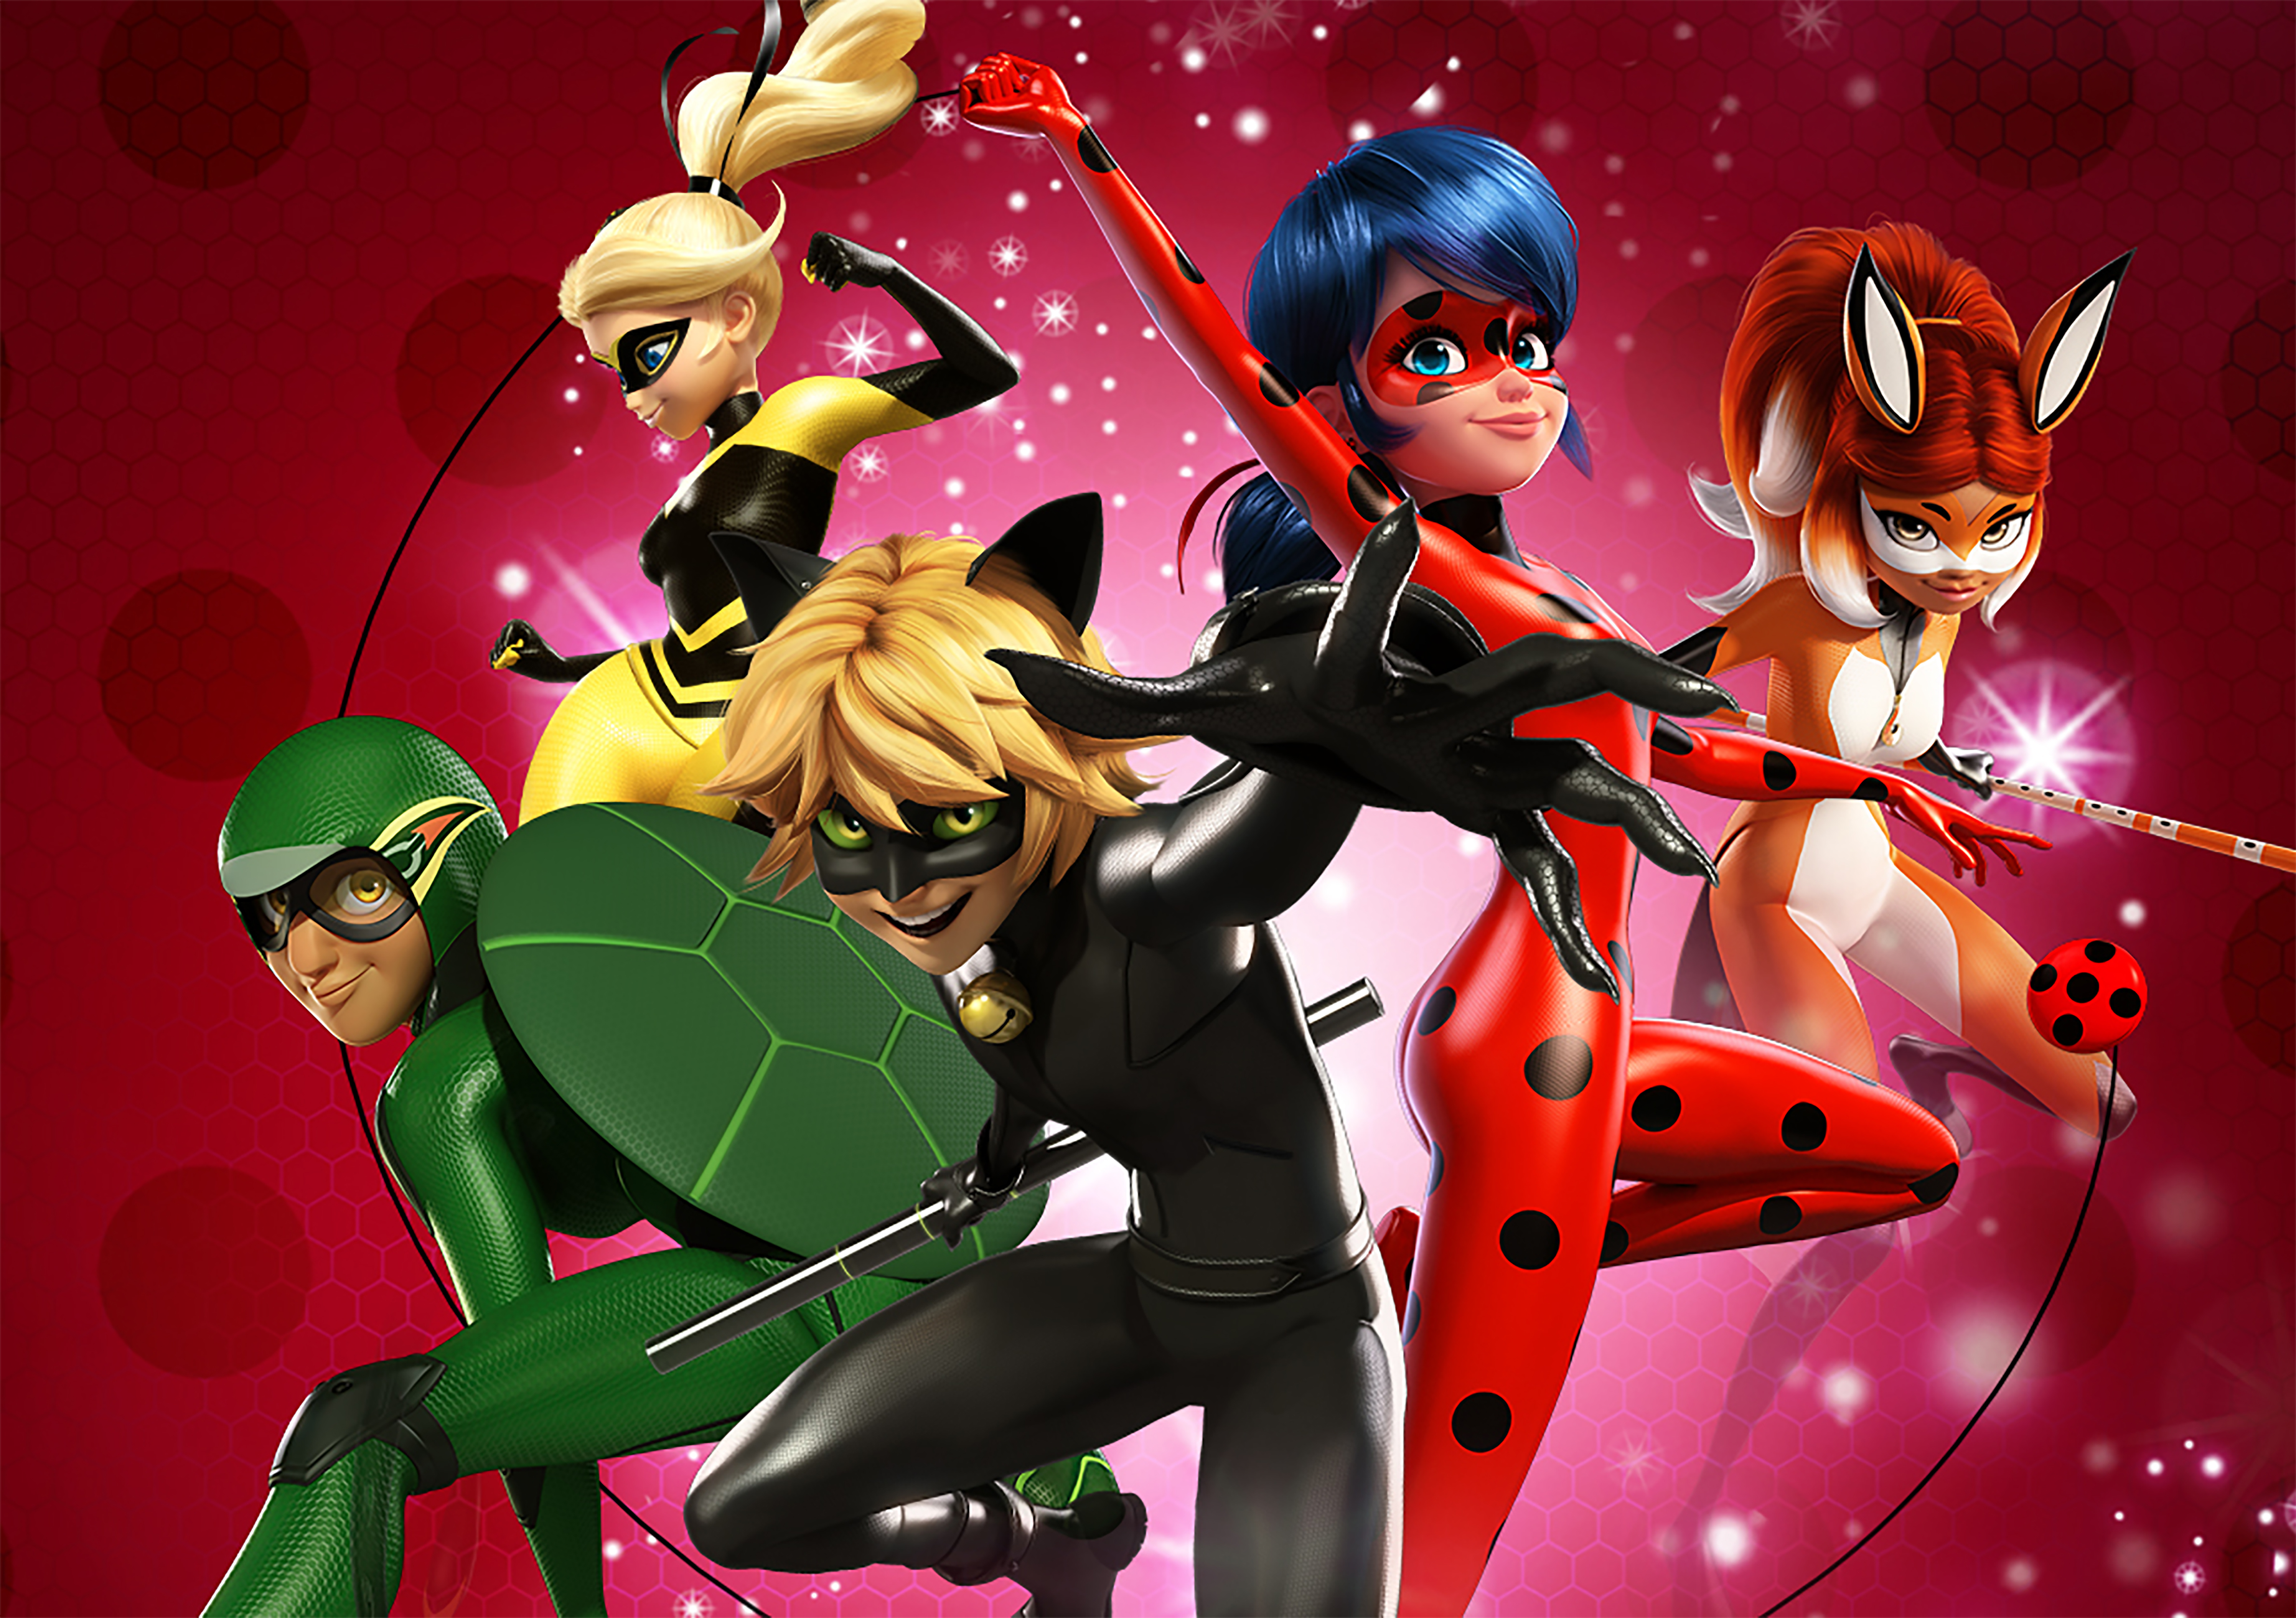 Miraculous™: Tales of Ladybug and Cat Noir” from The ZAG Company